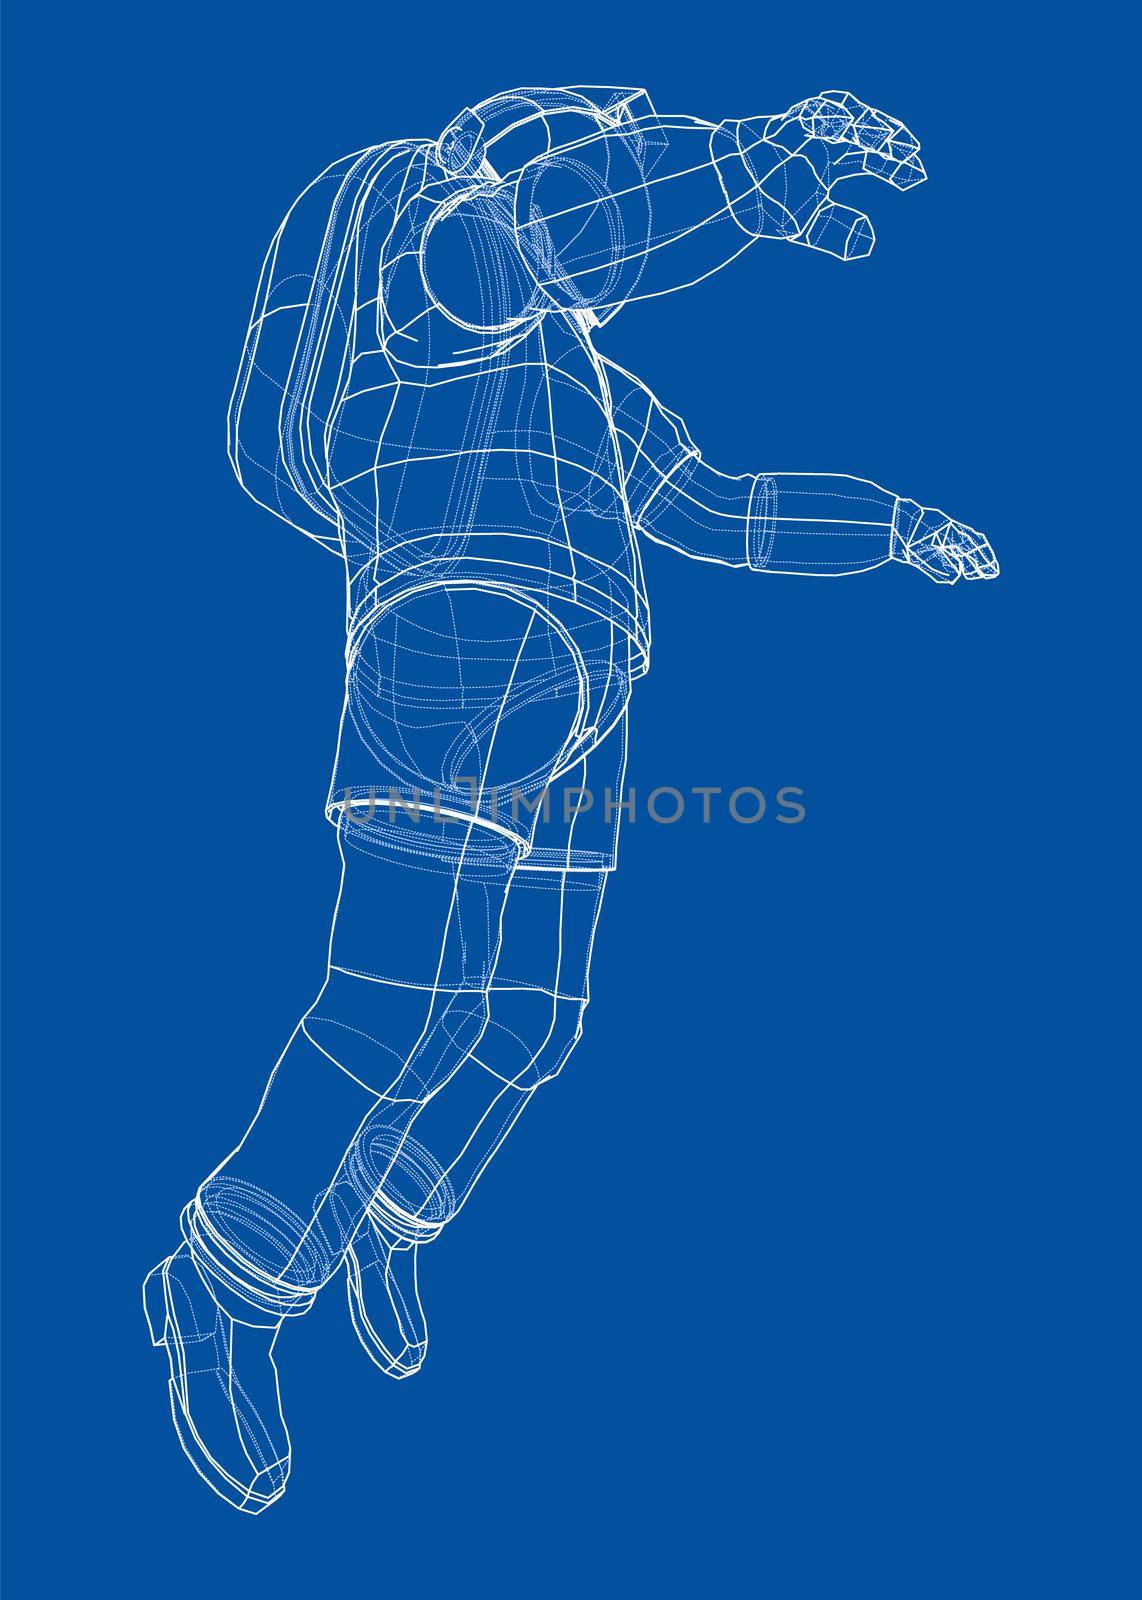 Astronaut concept. 3d illustration. Wire-frame or blueprint style